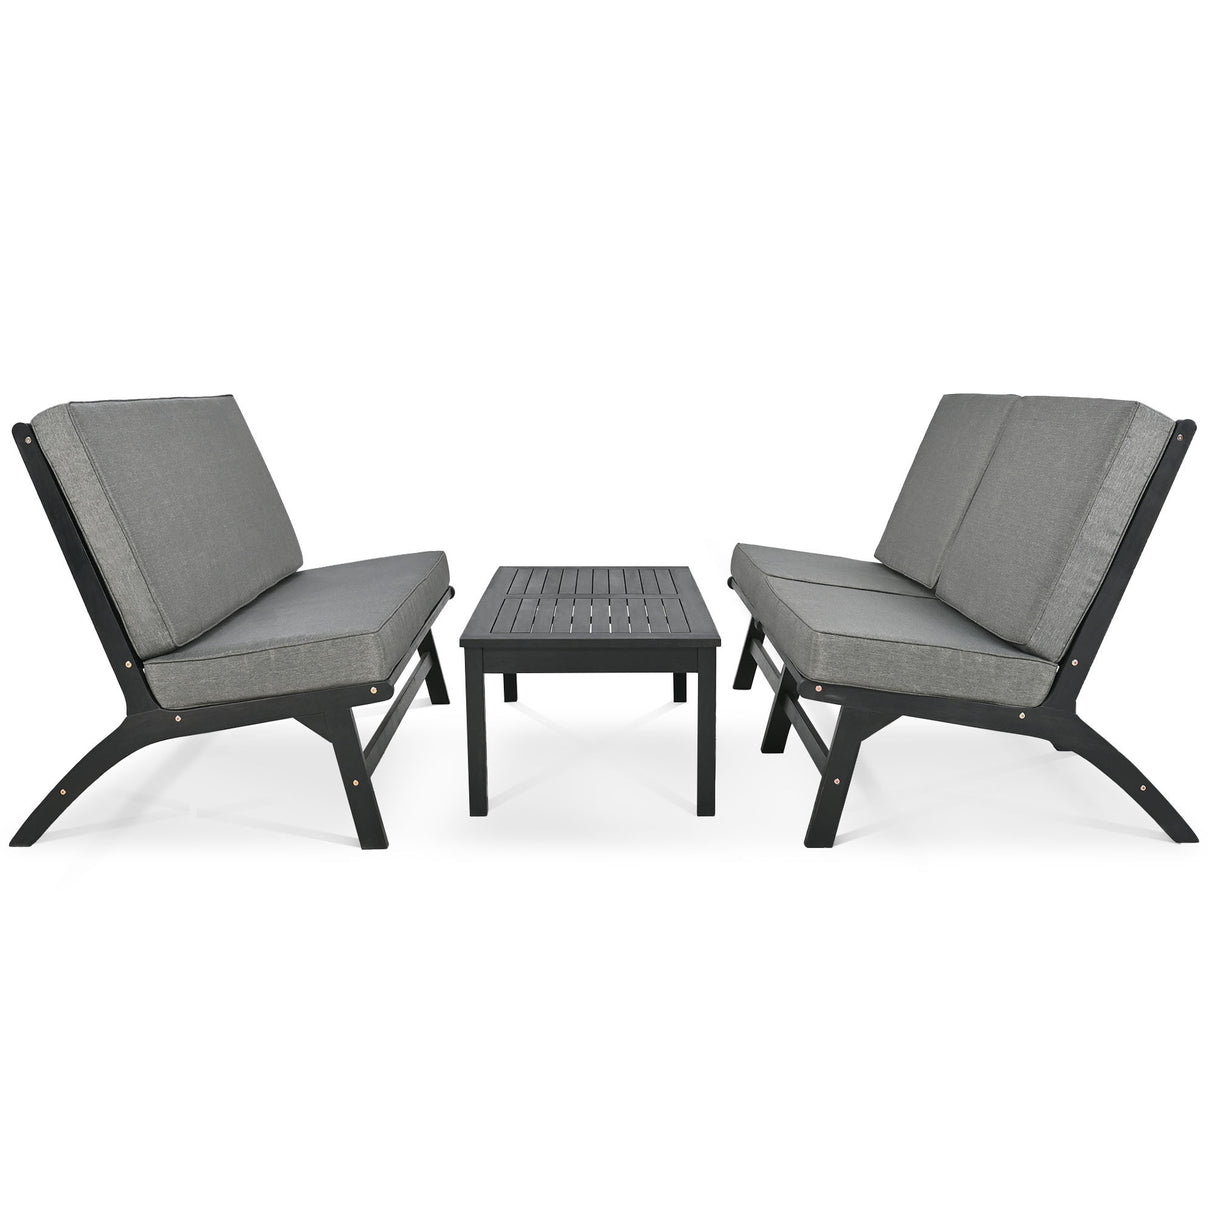 GO 4-Piece V-shaped Seats set, Acacia Solid Wood Outdoor Sofa, Garden Furniture, Outdoor seating, Black And Gray